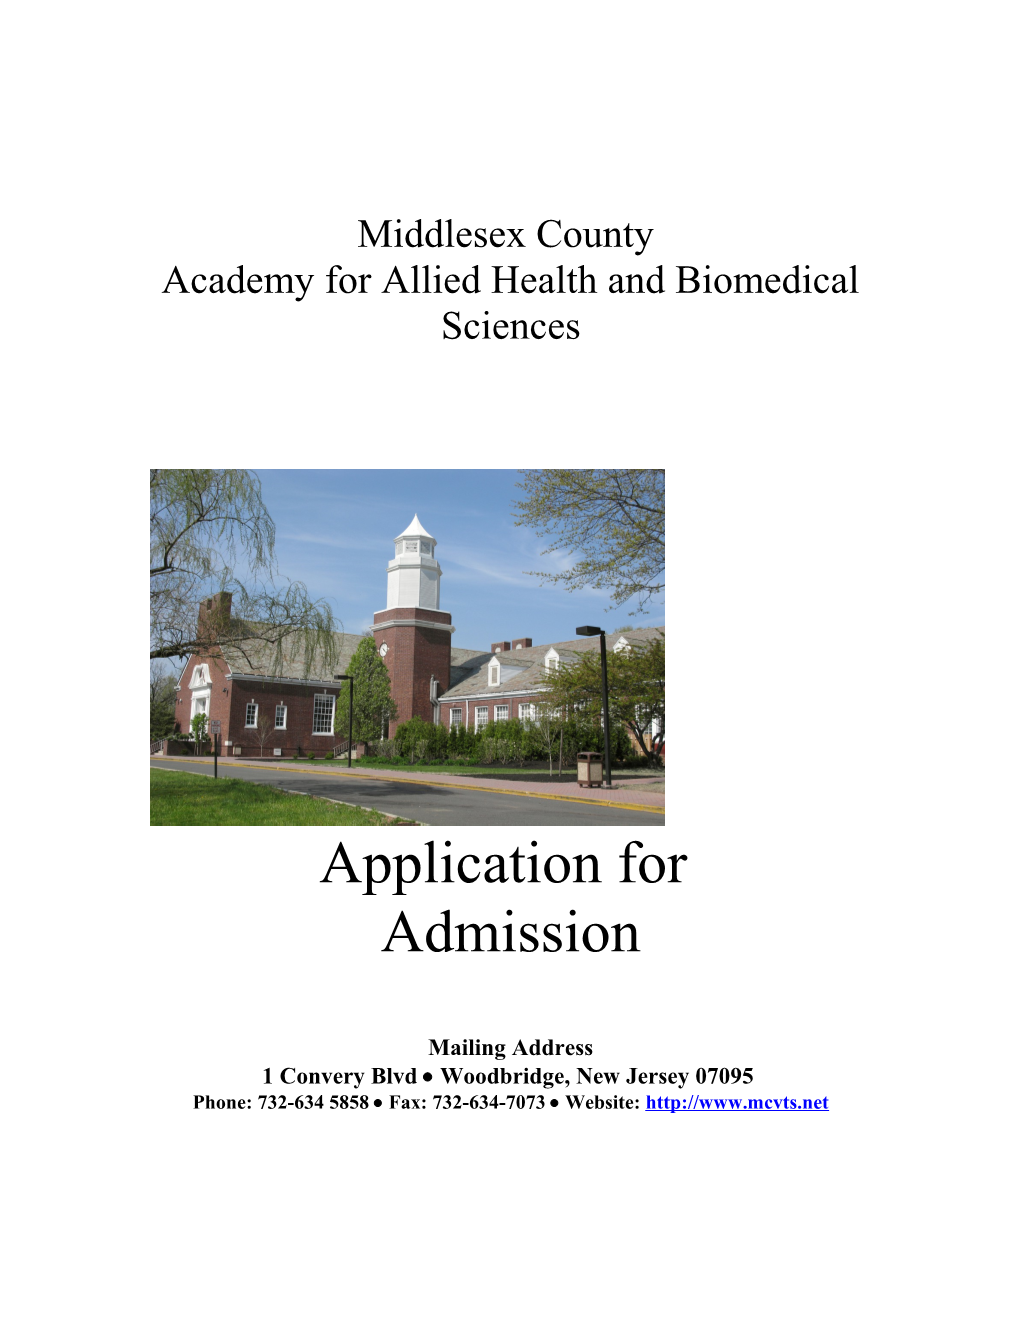 Academy for Allied Health and Biomedical Sciences